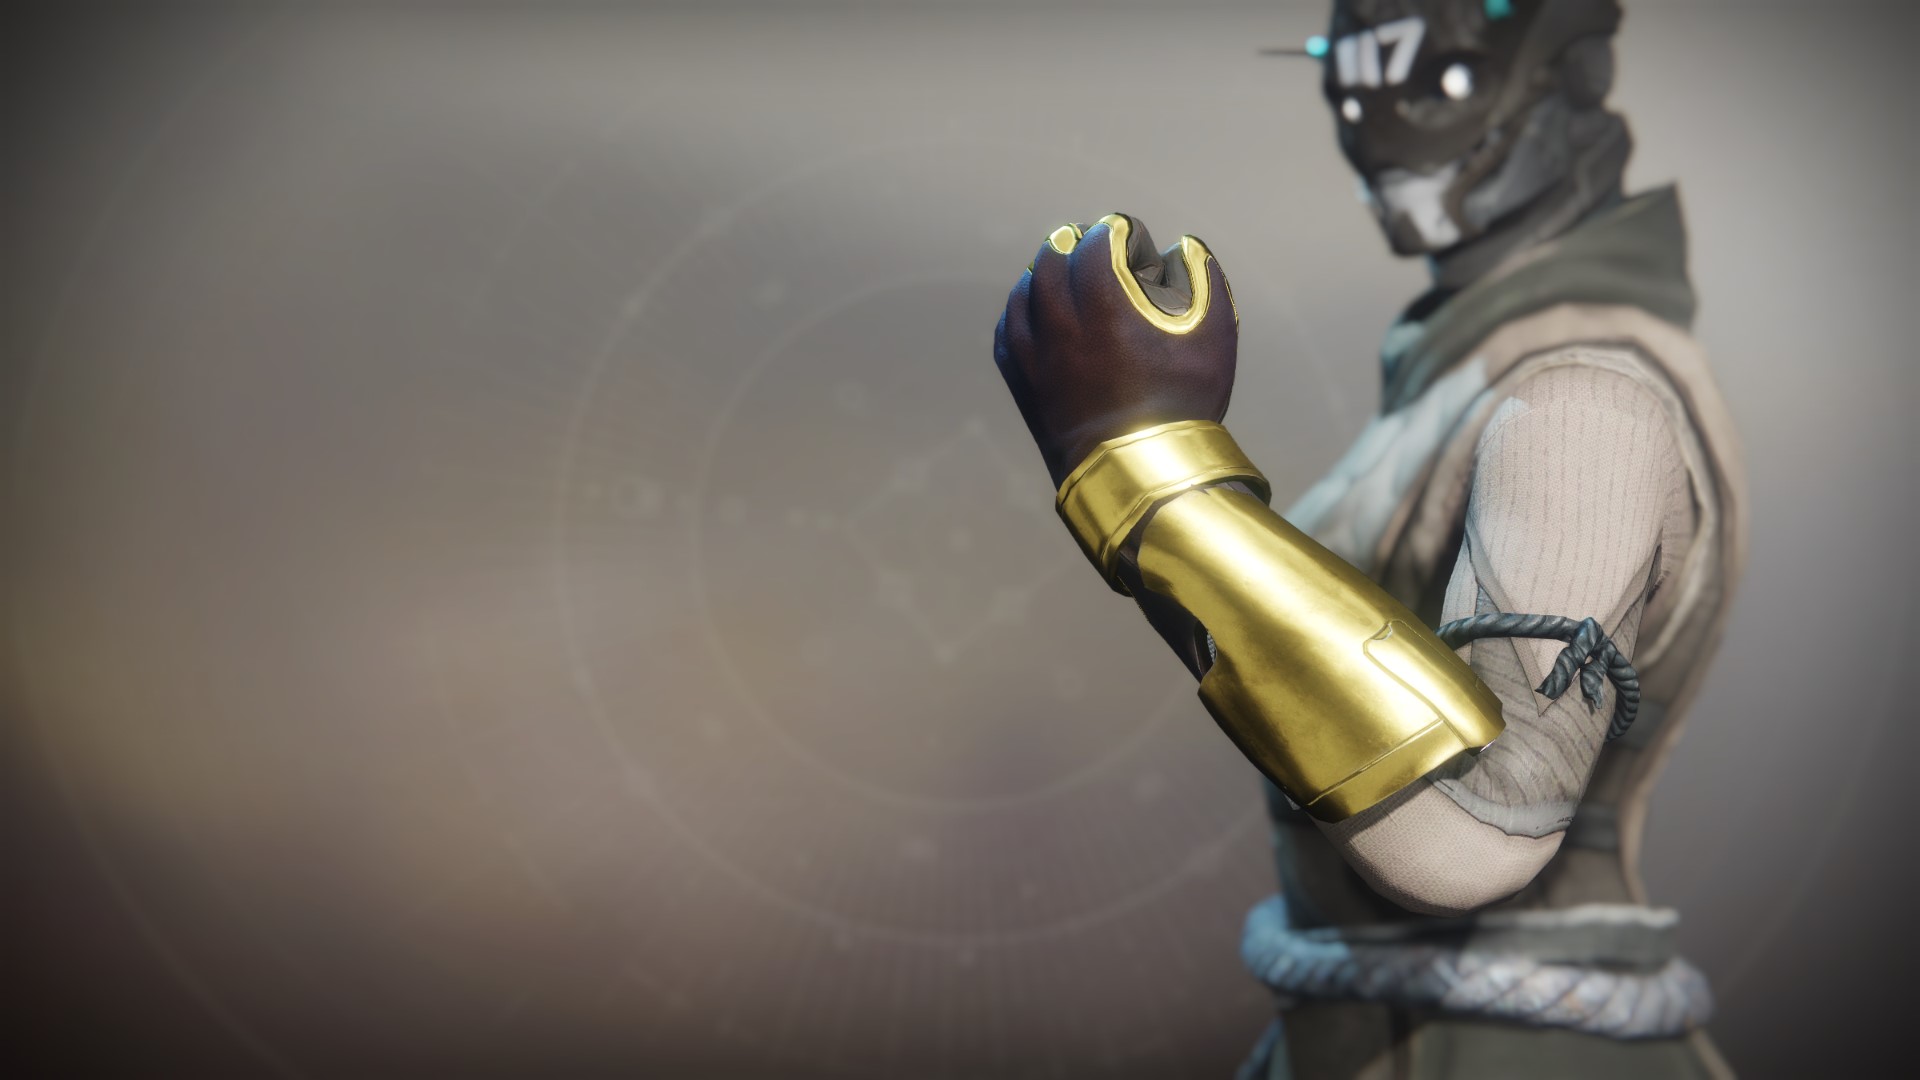 An in-game render of the Solstice Gloves (Majestic).